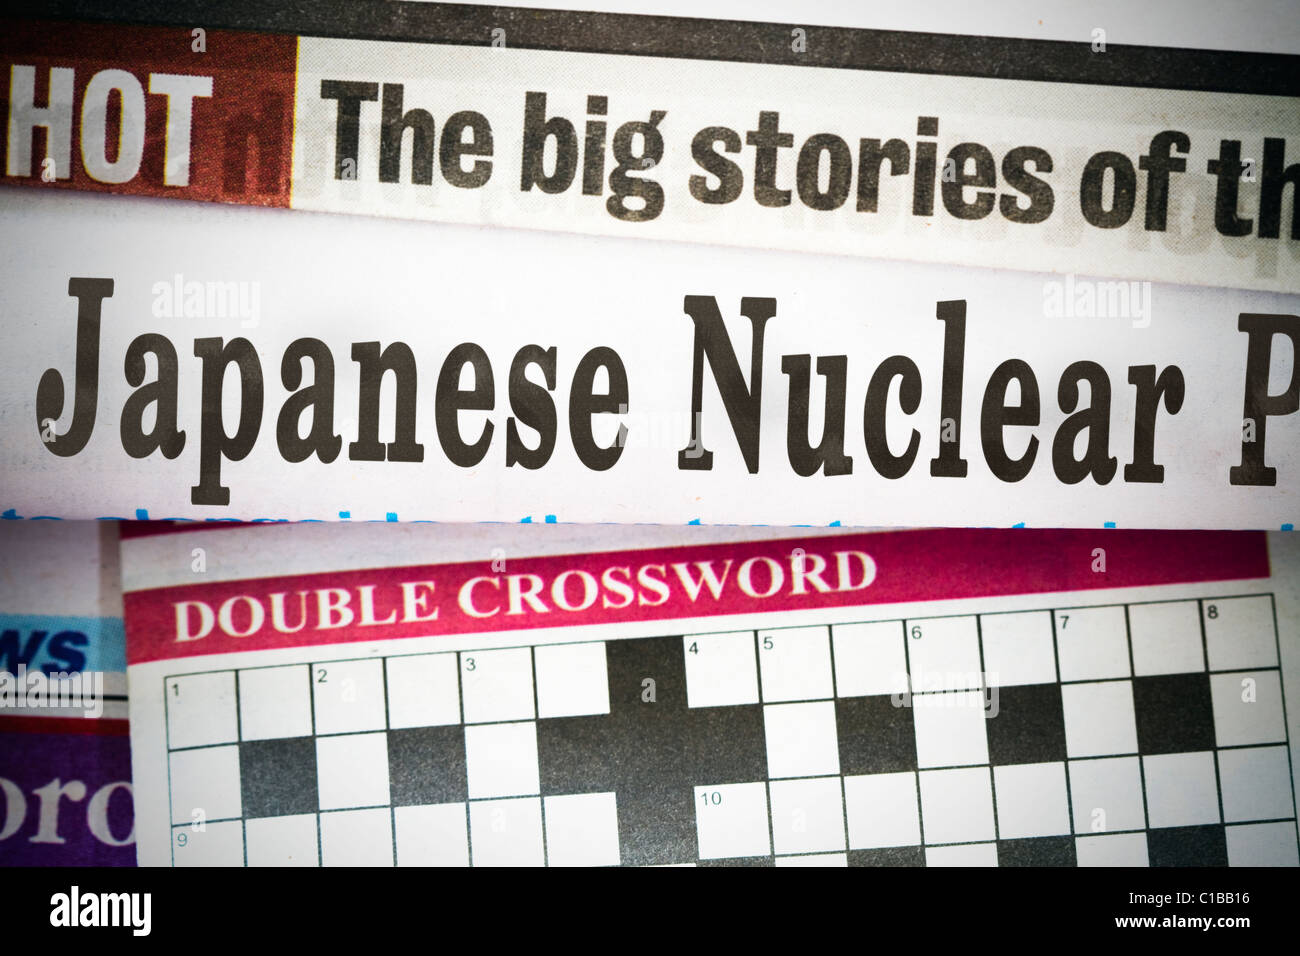 News reporting on Japanese nuclear plant issues. Vignette added. Stock Photo